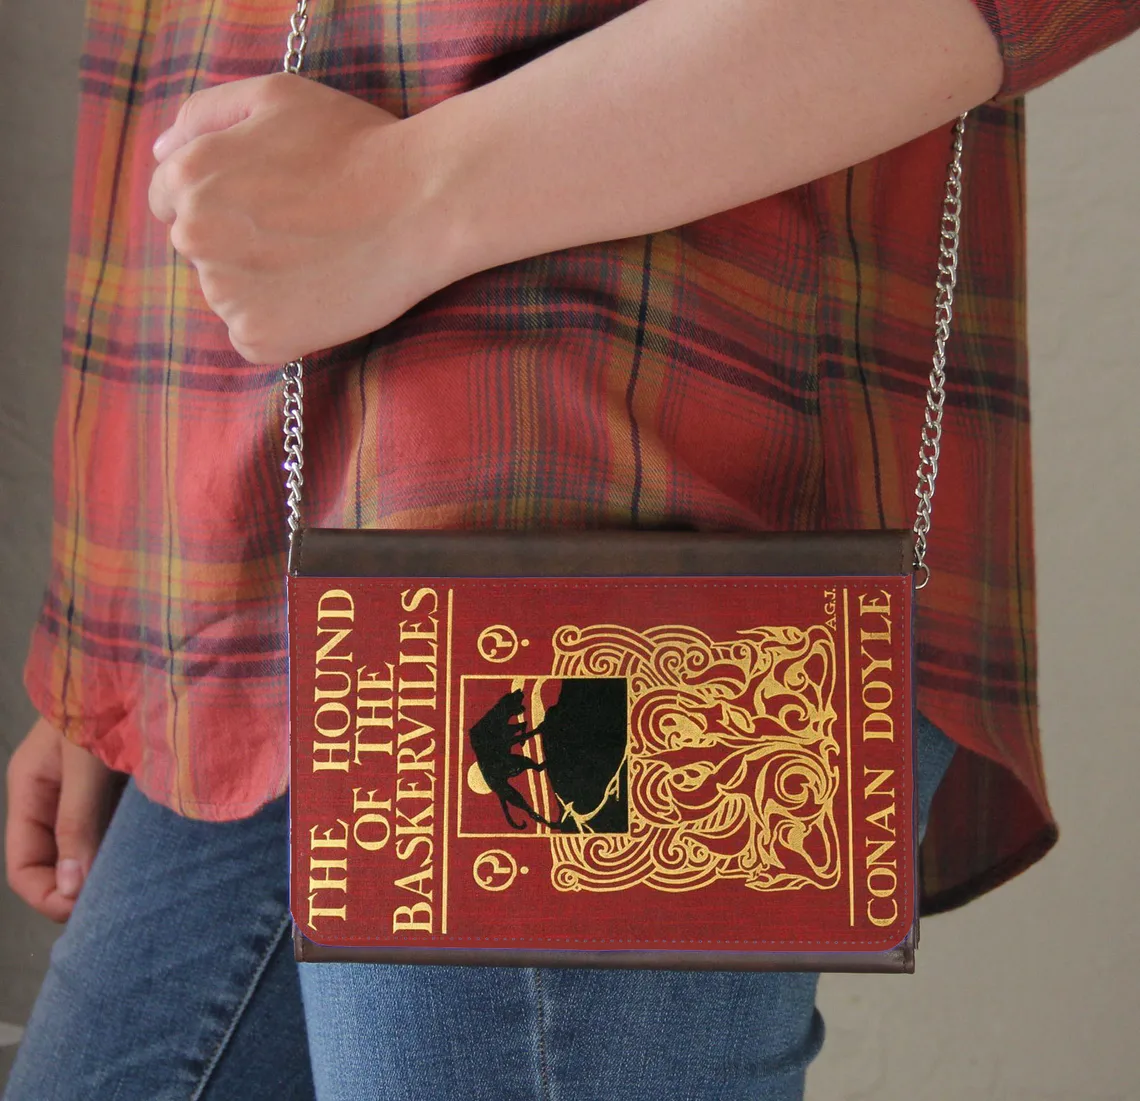 photo of a red purse shaped like a book with the book title "Hound of the Baskervilles" on it